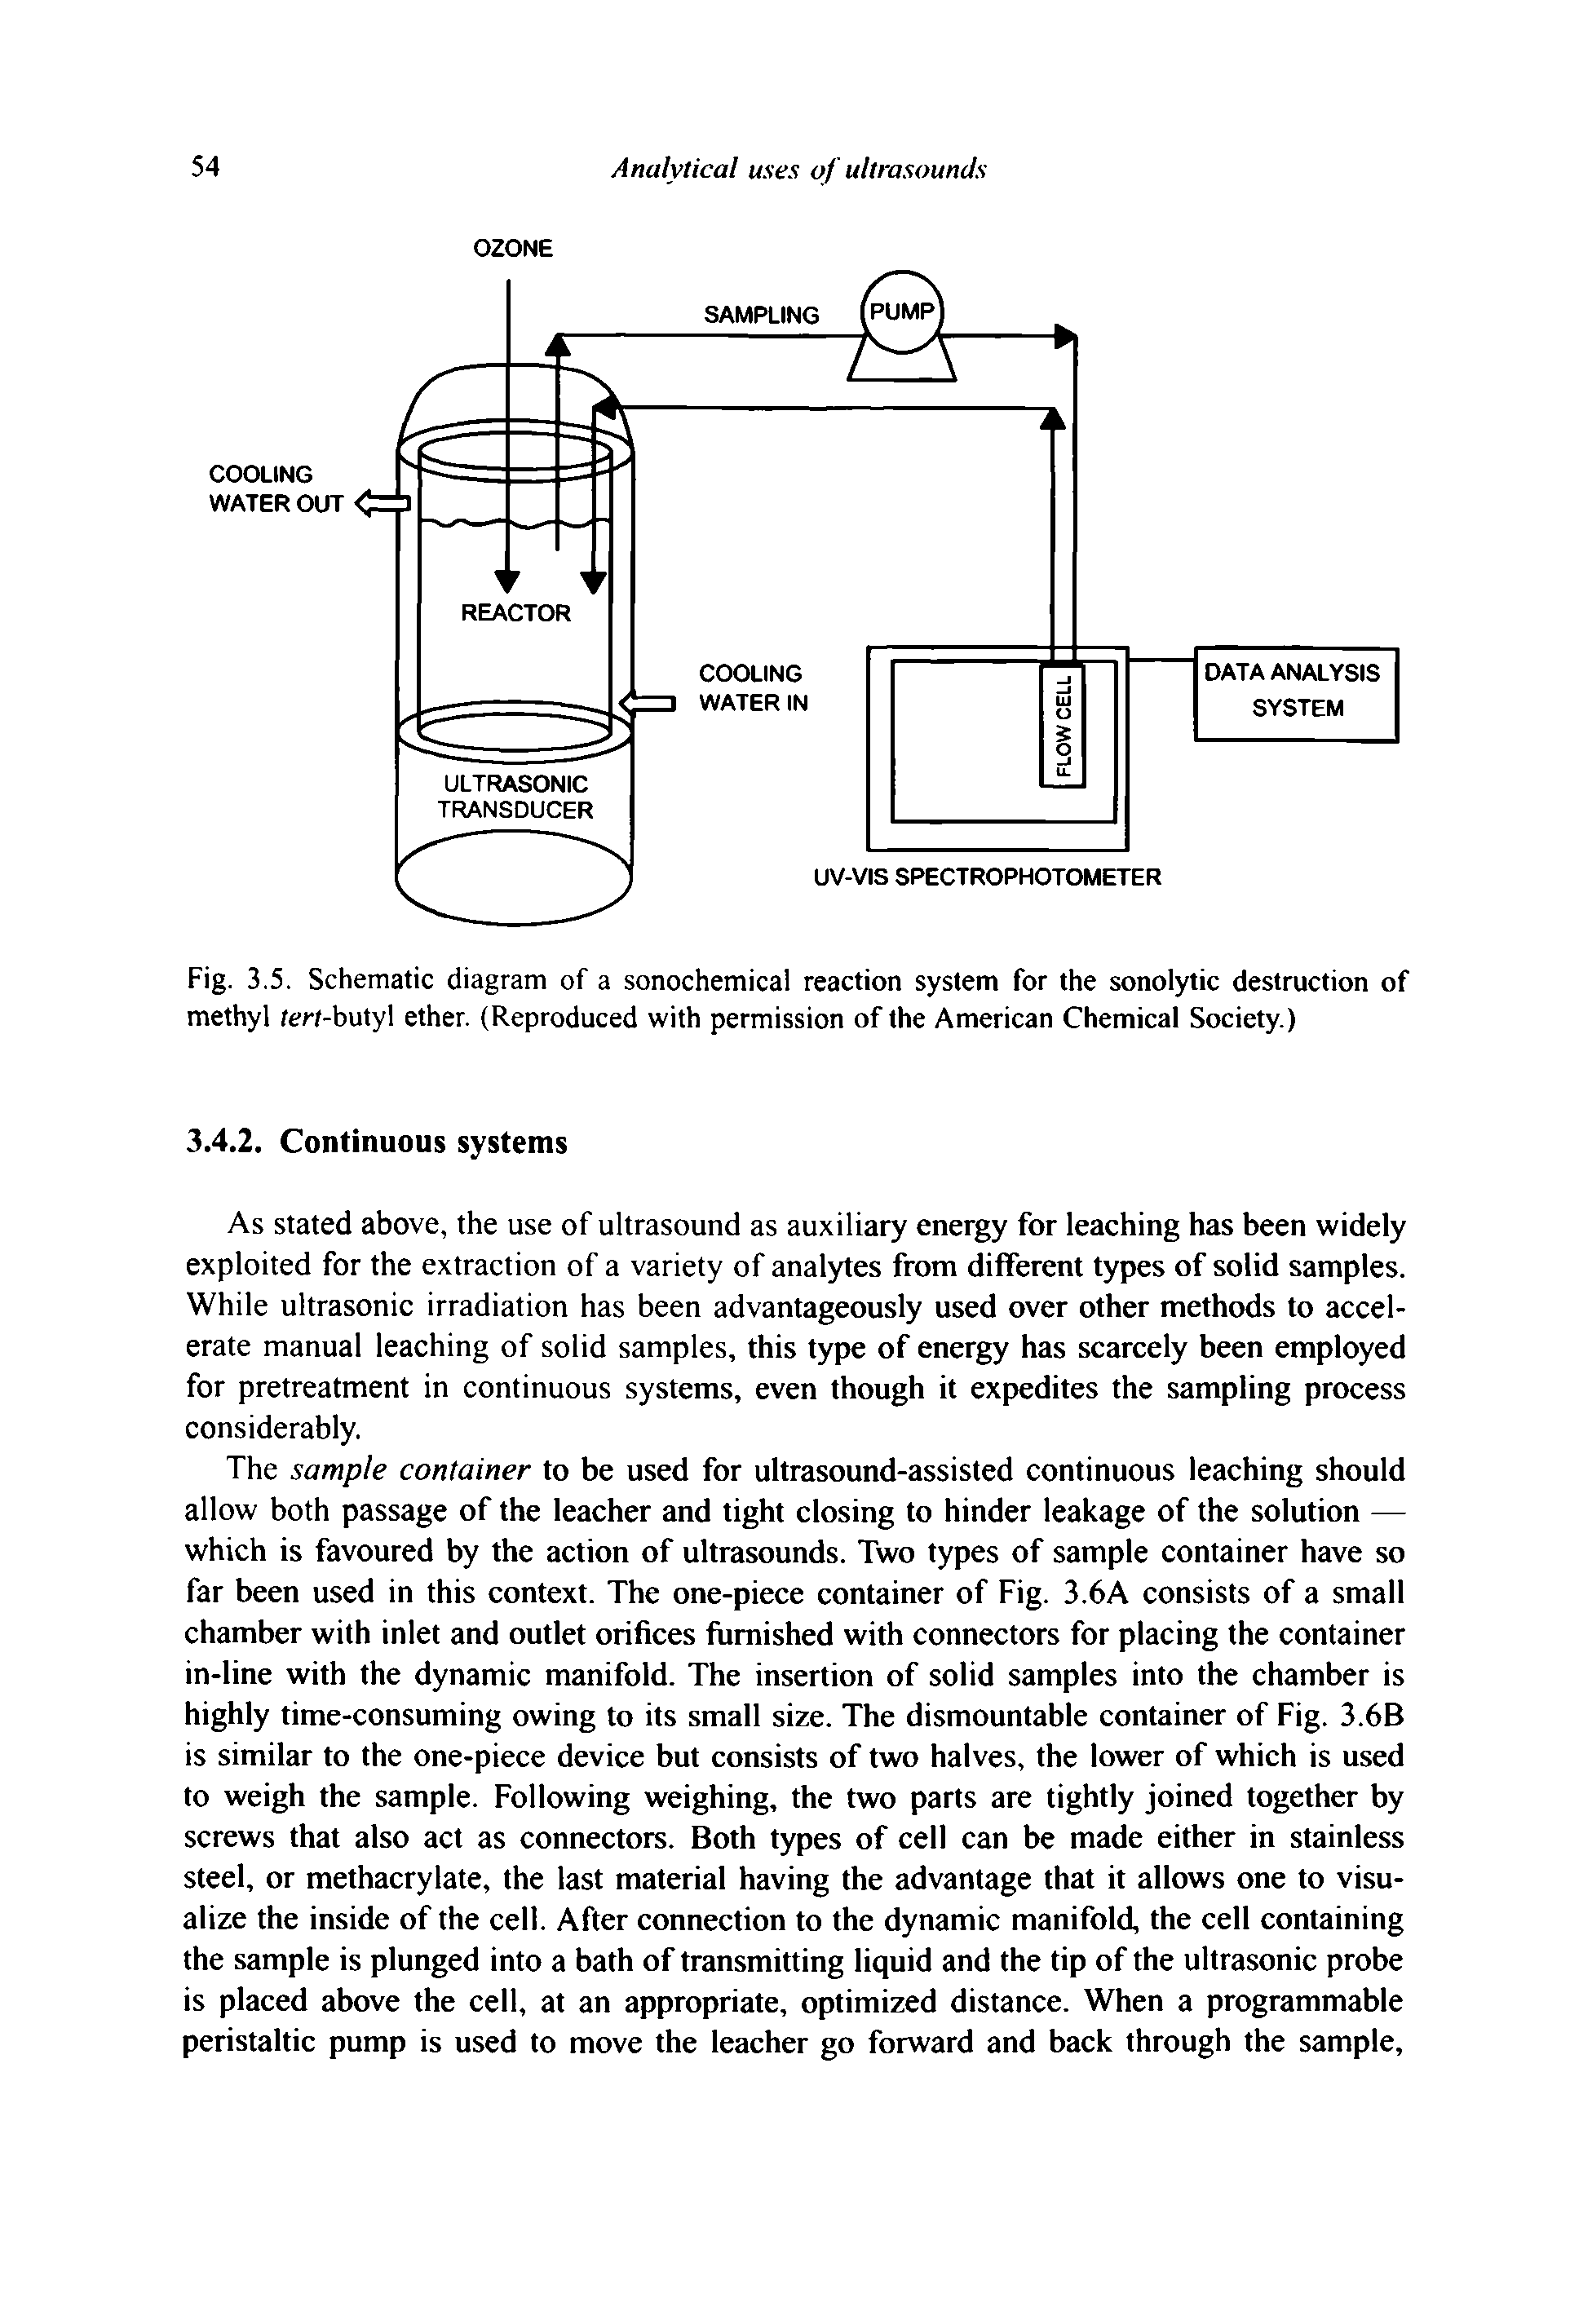 Fig. 3.5. Schematic diagram of a sonochemical reaction system for the sonolytic destruction of methyl terf-butyl ether. (Reproduced with permission of the American Chemical Society.)...